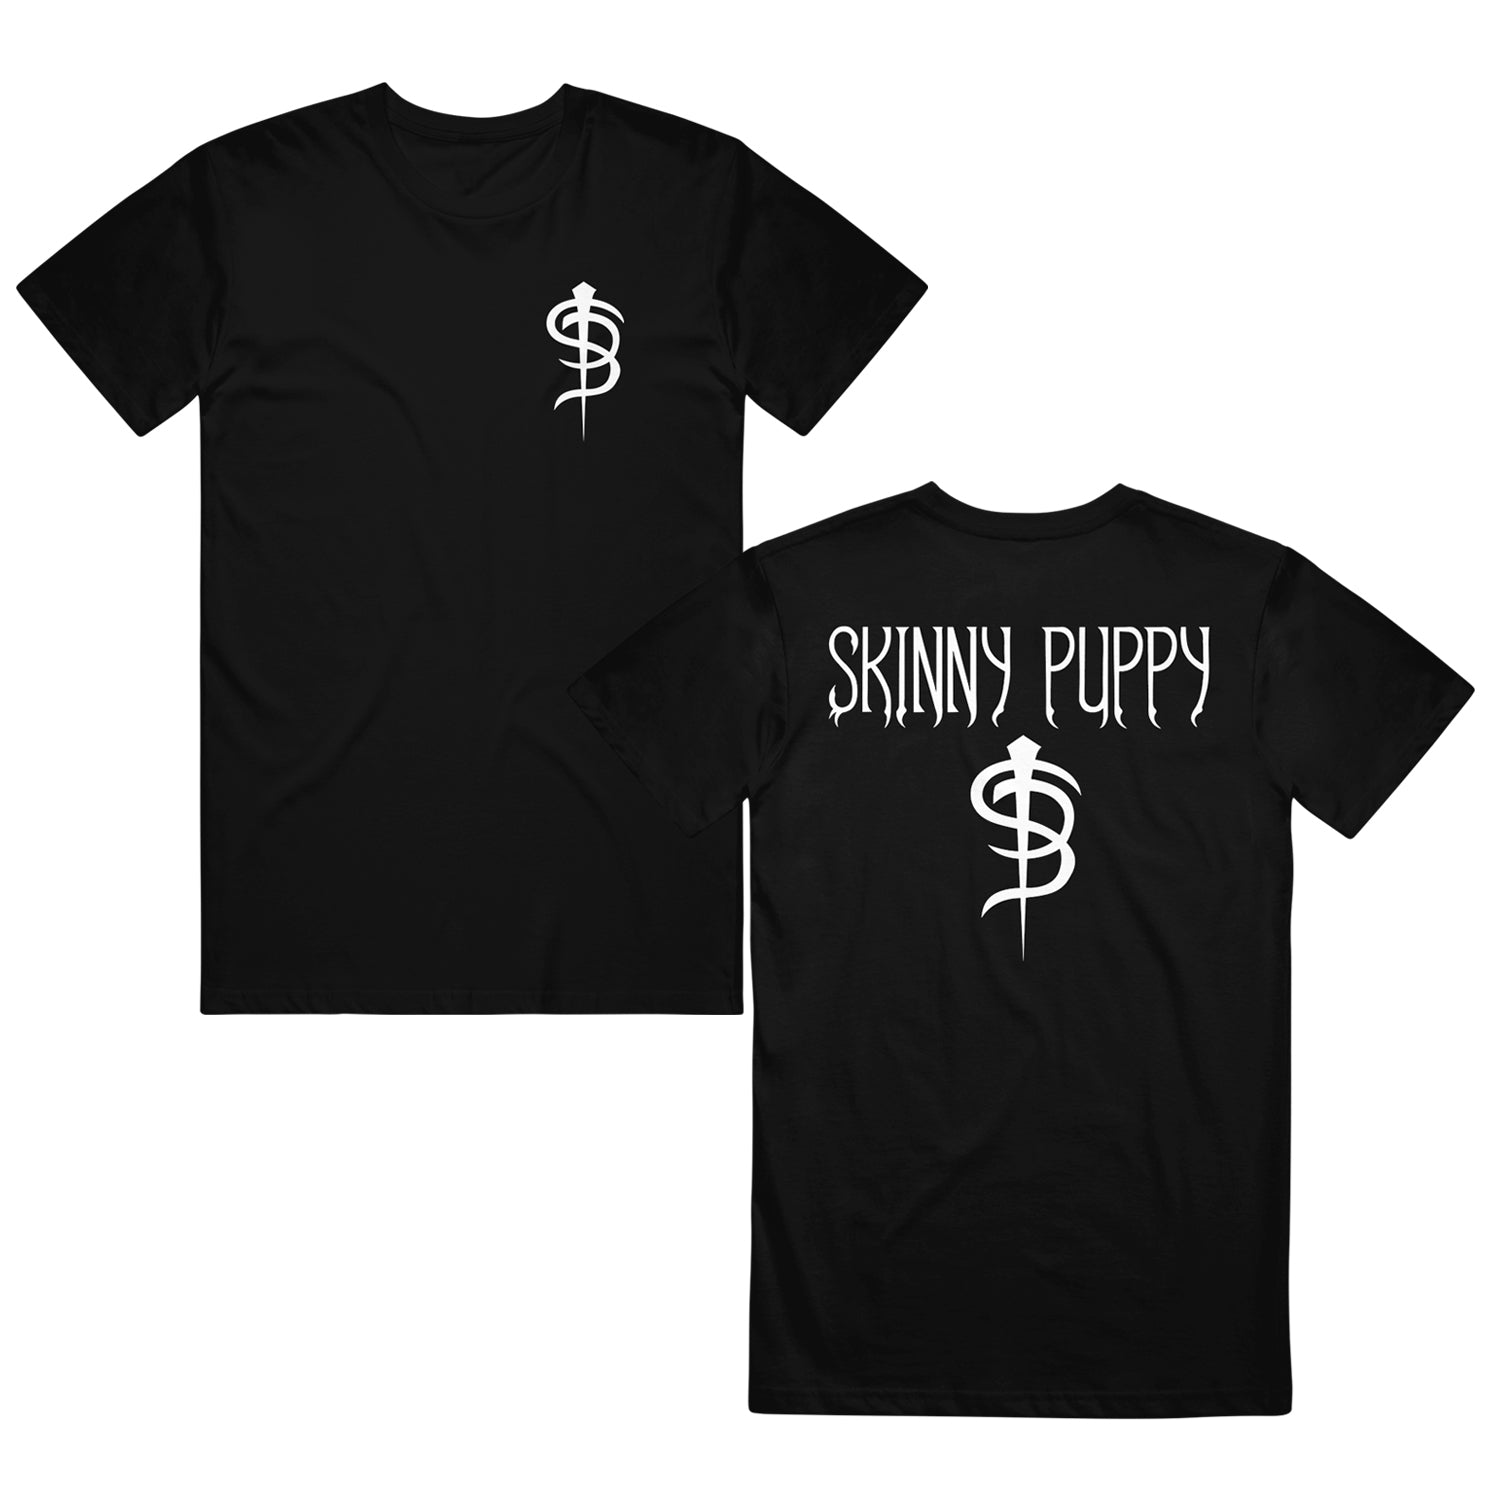 Skinny Puppy Official Merchandise